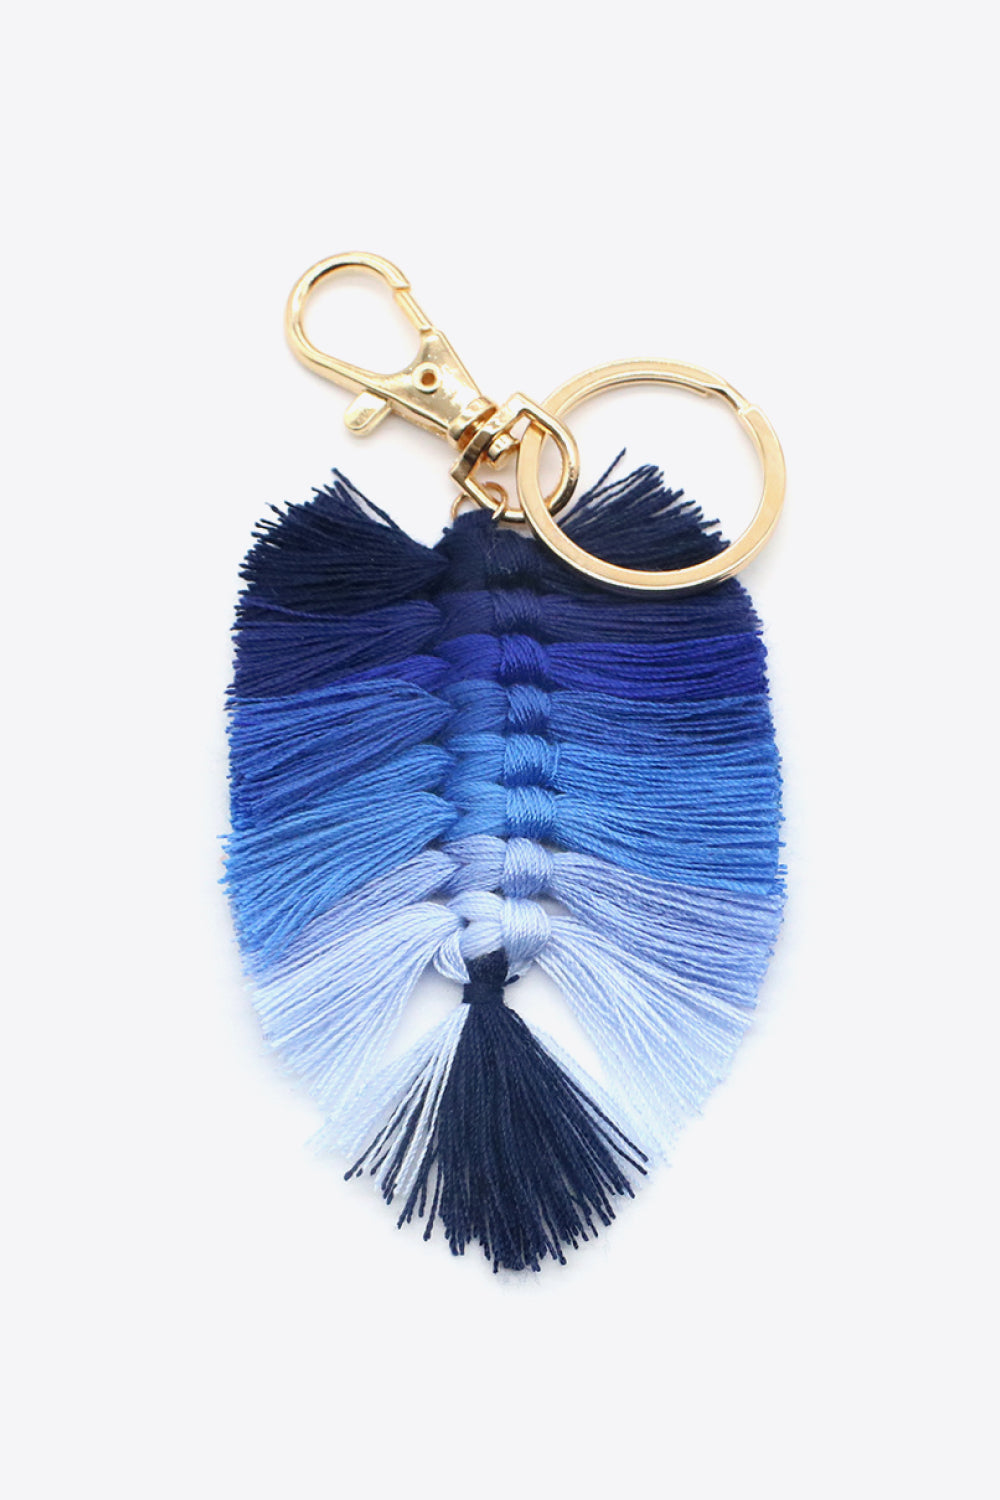 Trendsi Cupid Beauty Supplies Royal Blue / One Size Keychains Assorted 4-Pack Leaf Shape Fringe Keychain